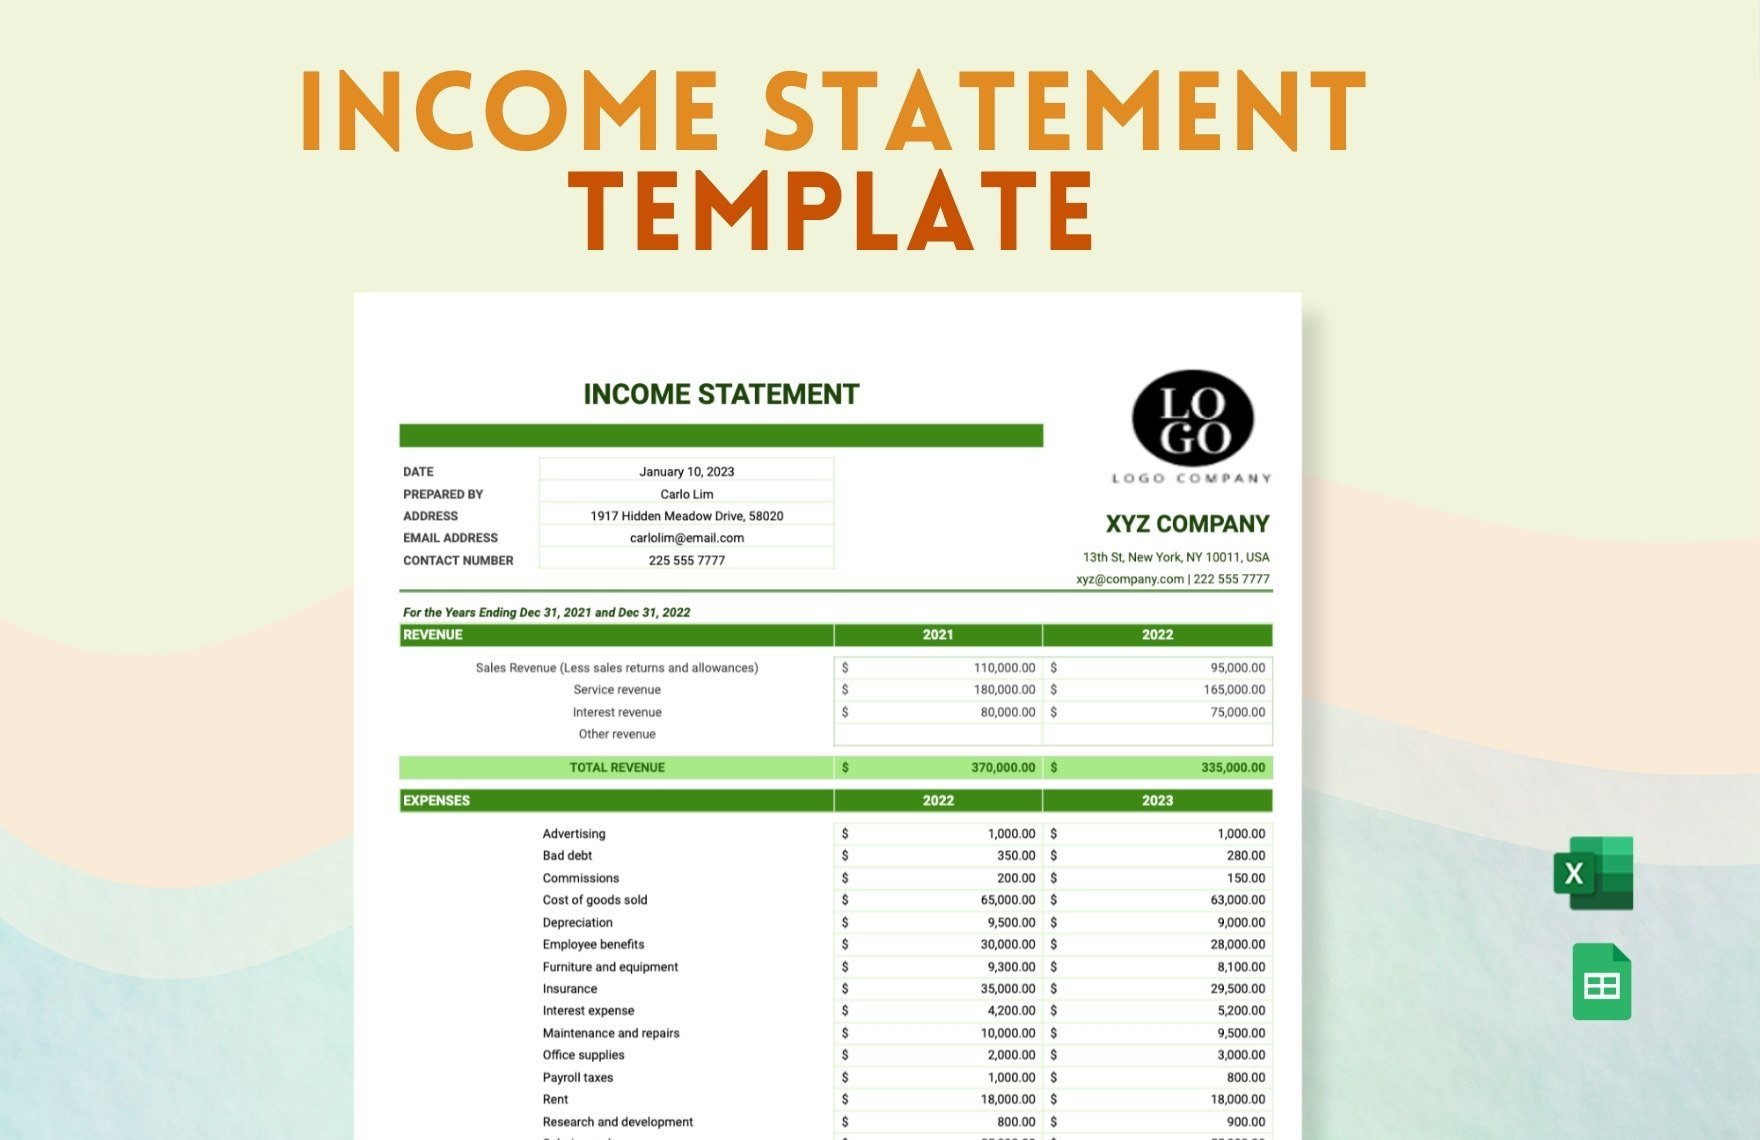 Free Income Statement Template in Excel, Google Sheets